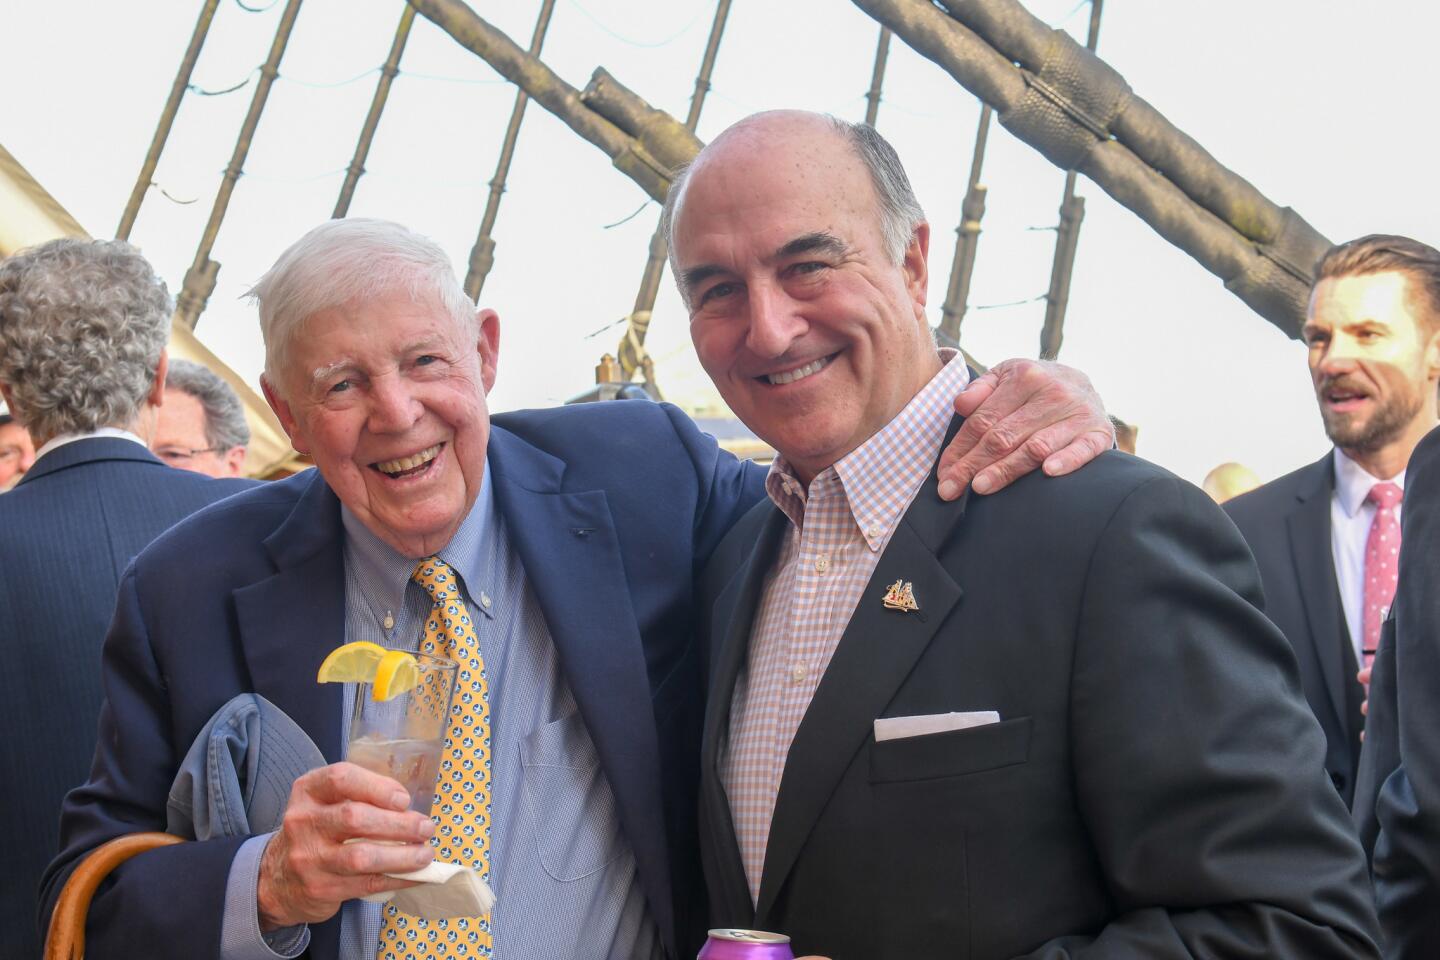 Truman Semans and Mike Gill attended Historic Ships' Captain's Jubilee on board the USS Constellation.